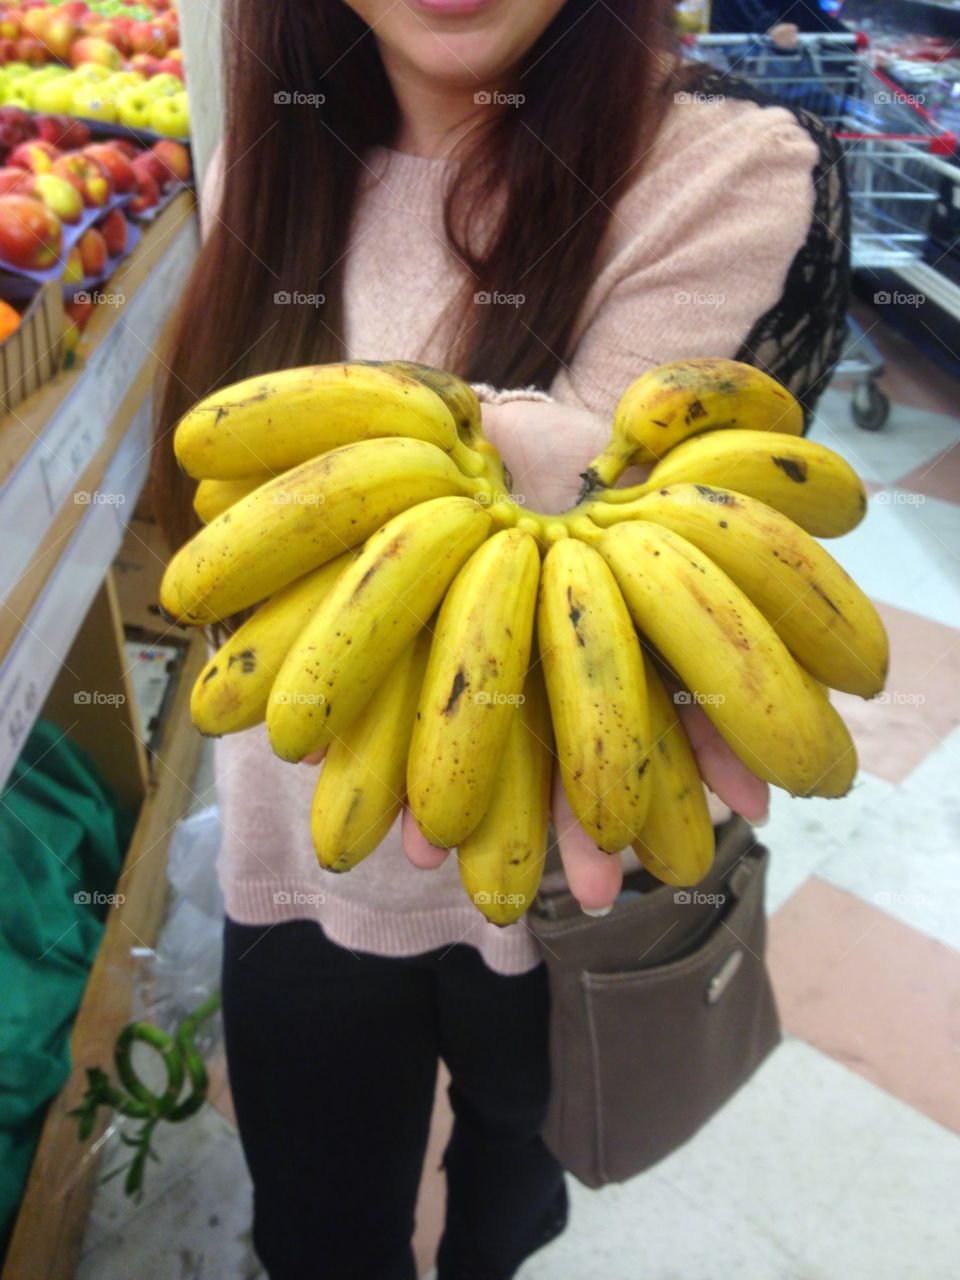 Small Than a Hand. Found these small bananas in a Korean market!